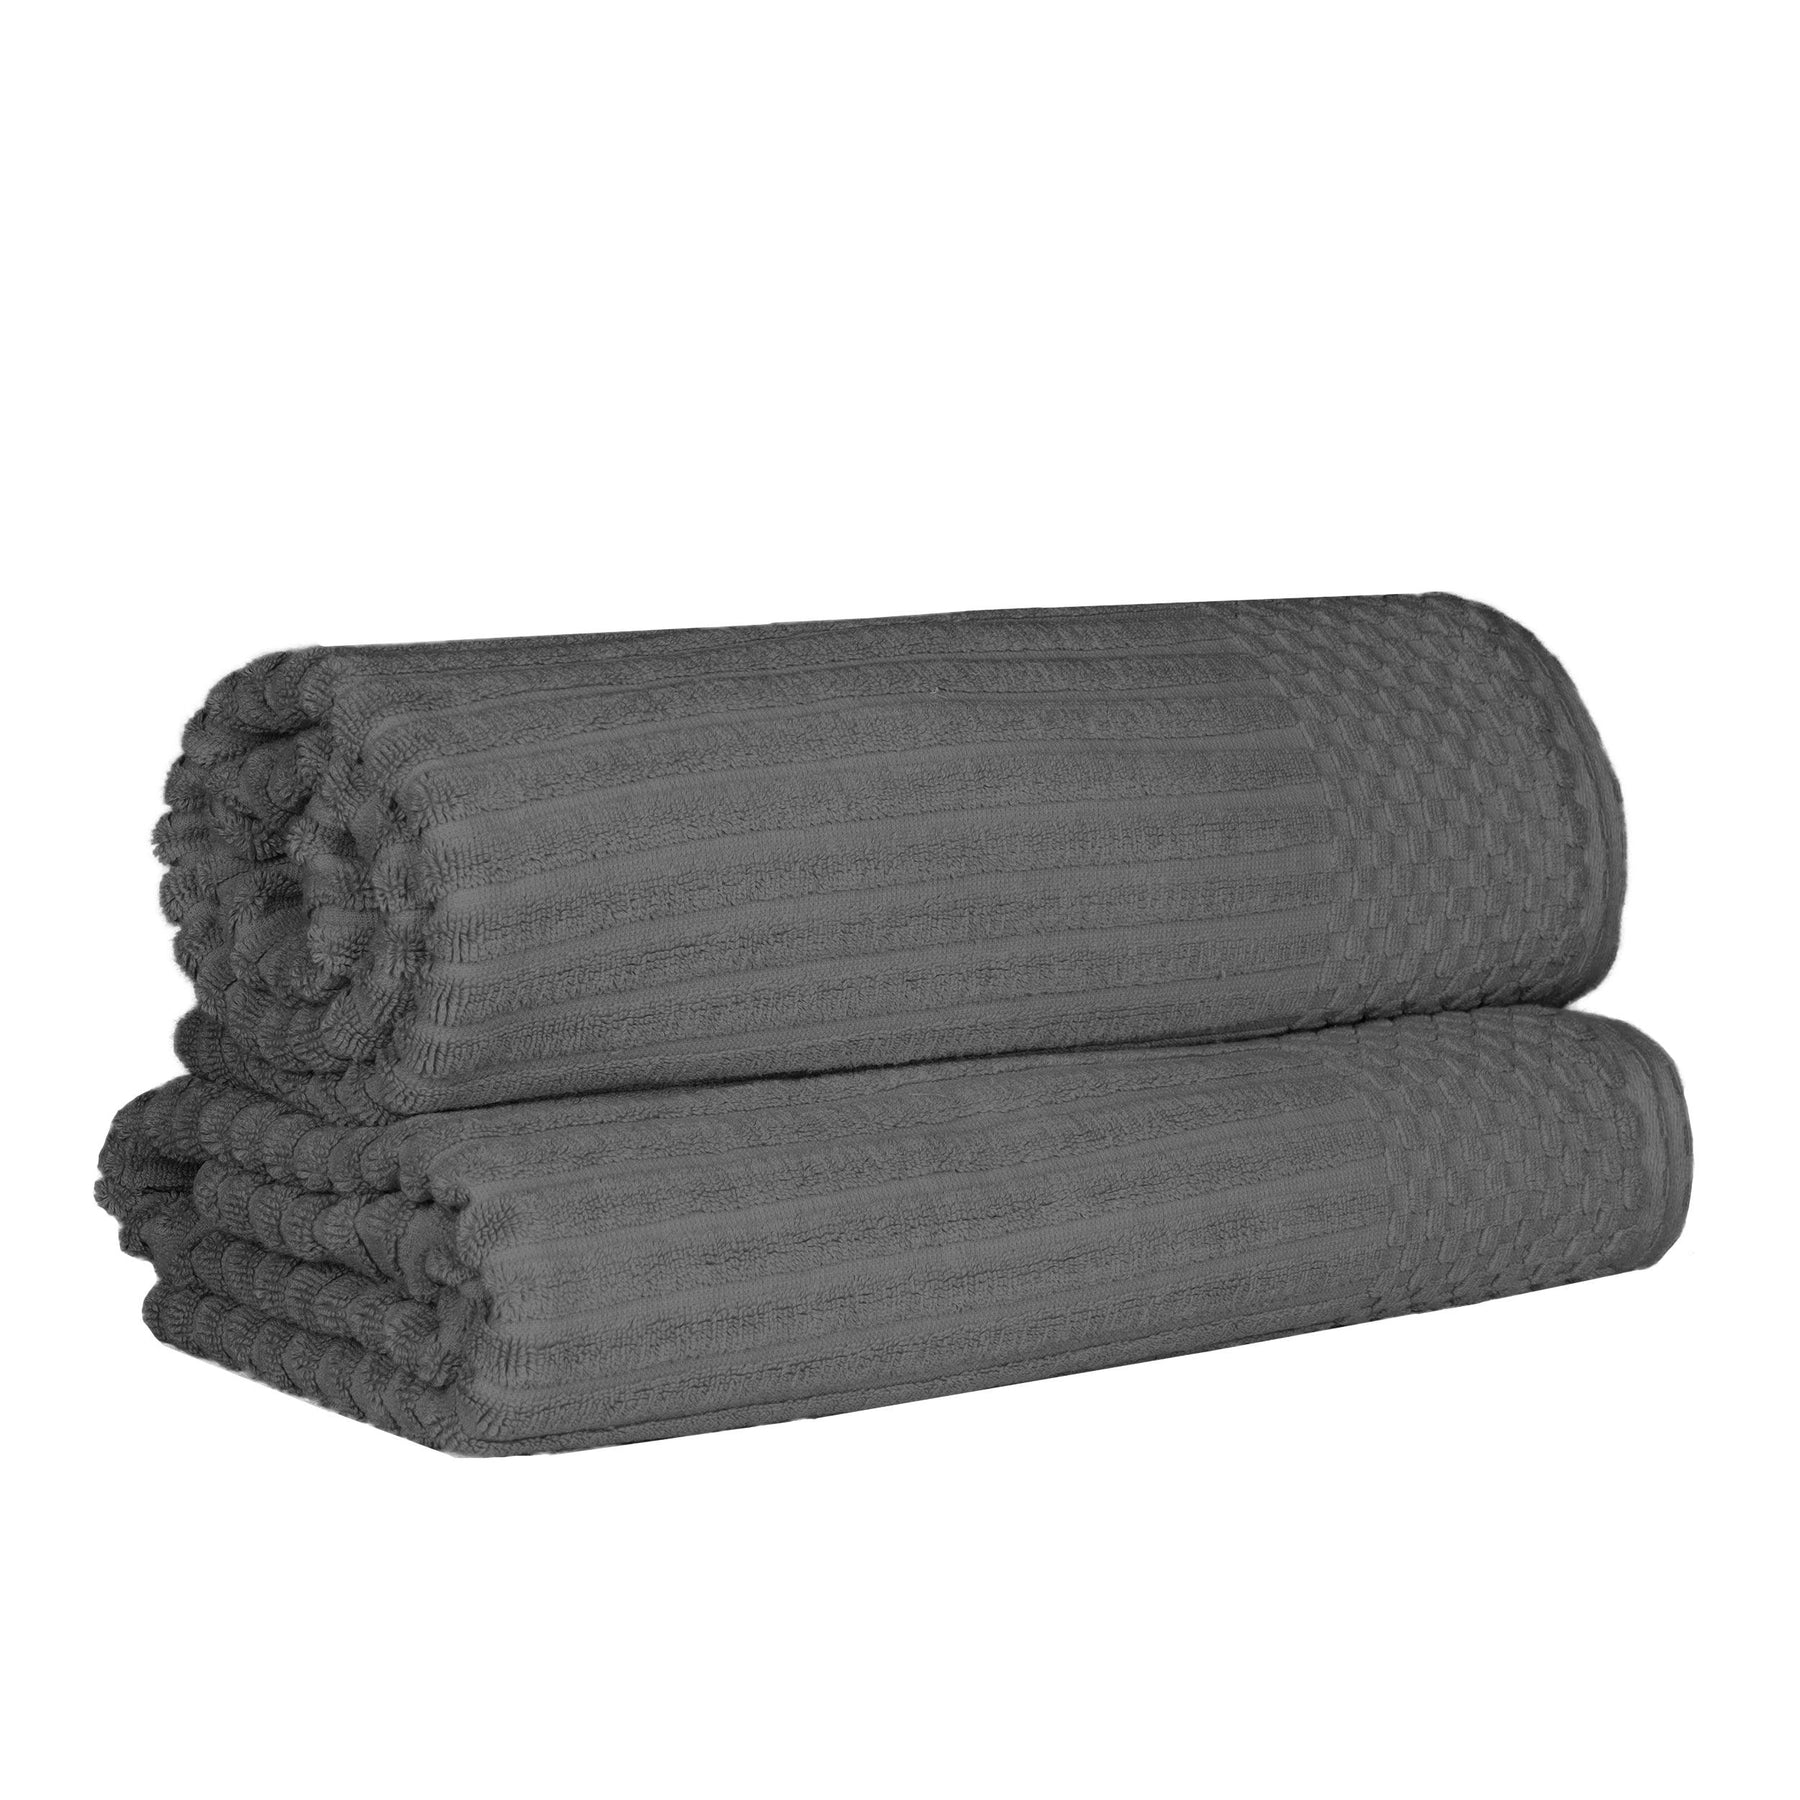 Ribbed Textured Cotton Bath Sheet Ultra-Absorbent Towel Set w- Charcoal